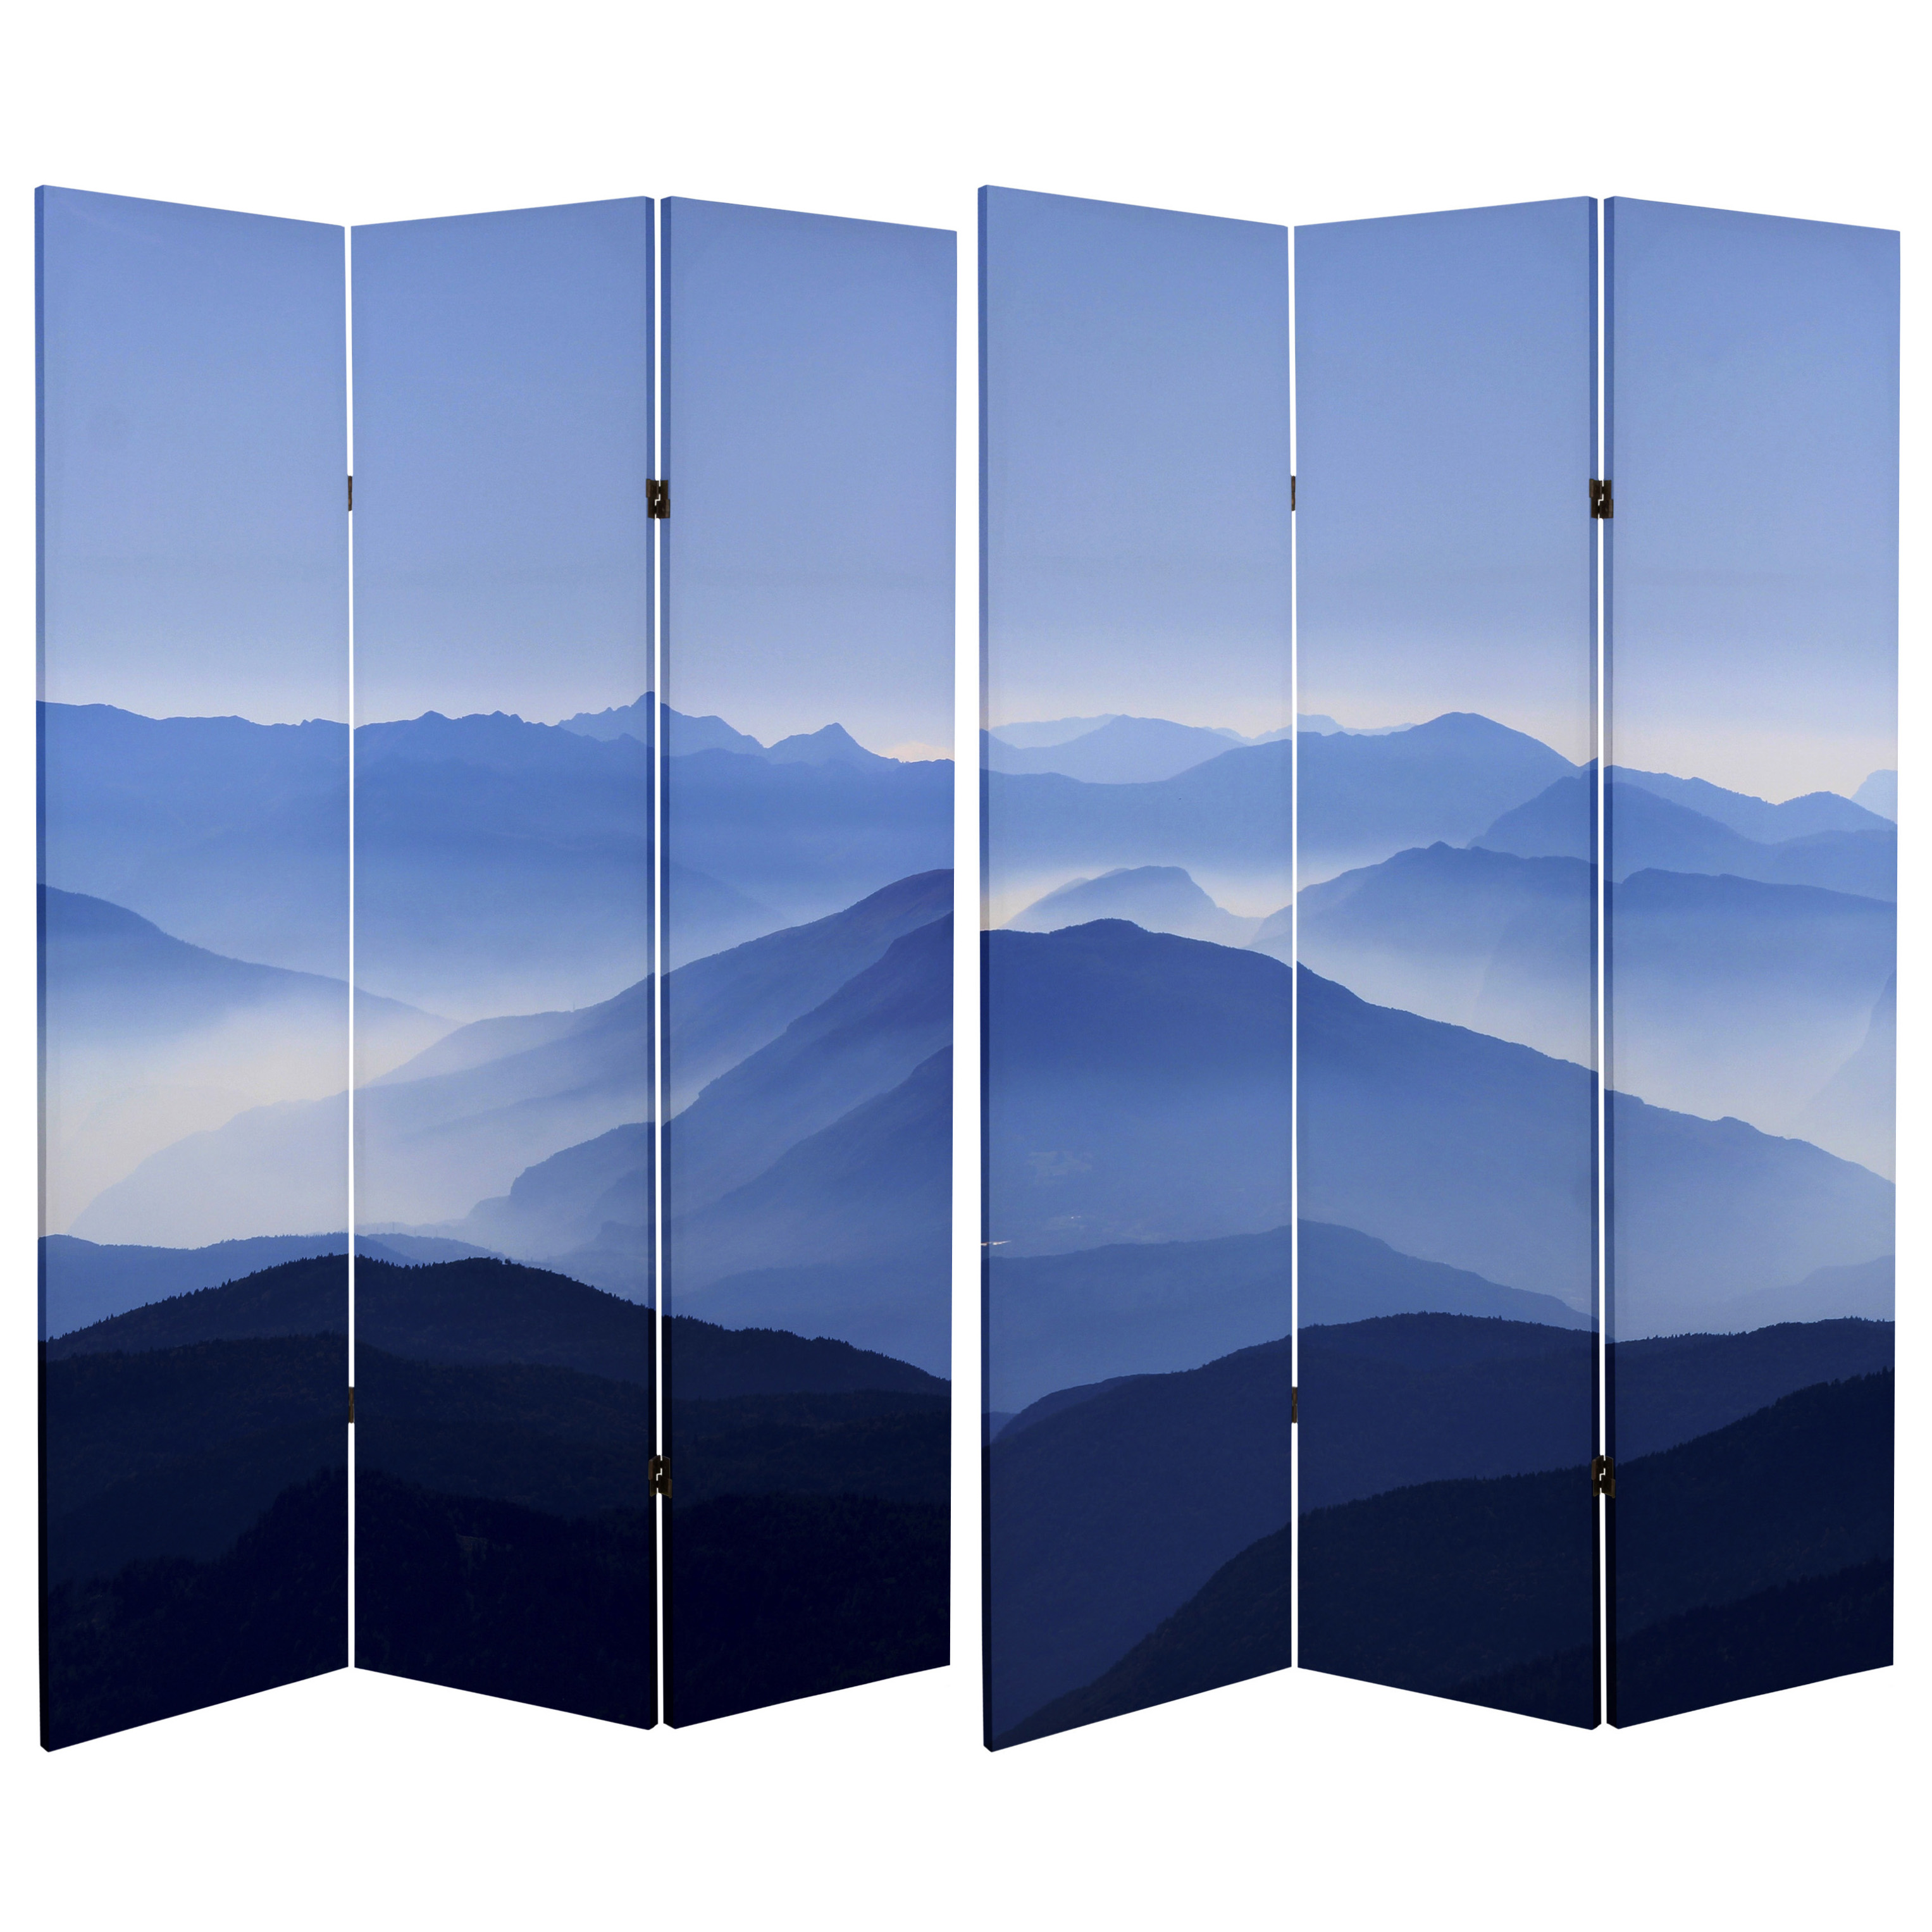 Red Lantern 6 ft. Tall Double Sided Misty Mountain Canvas Room Divider